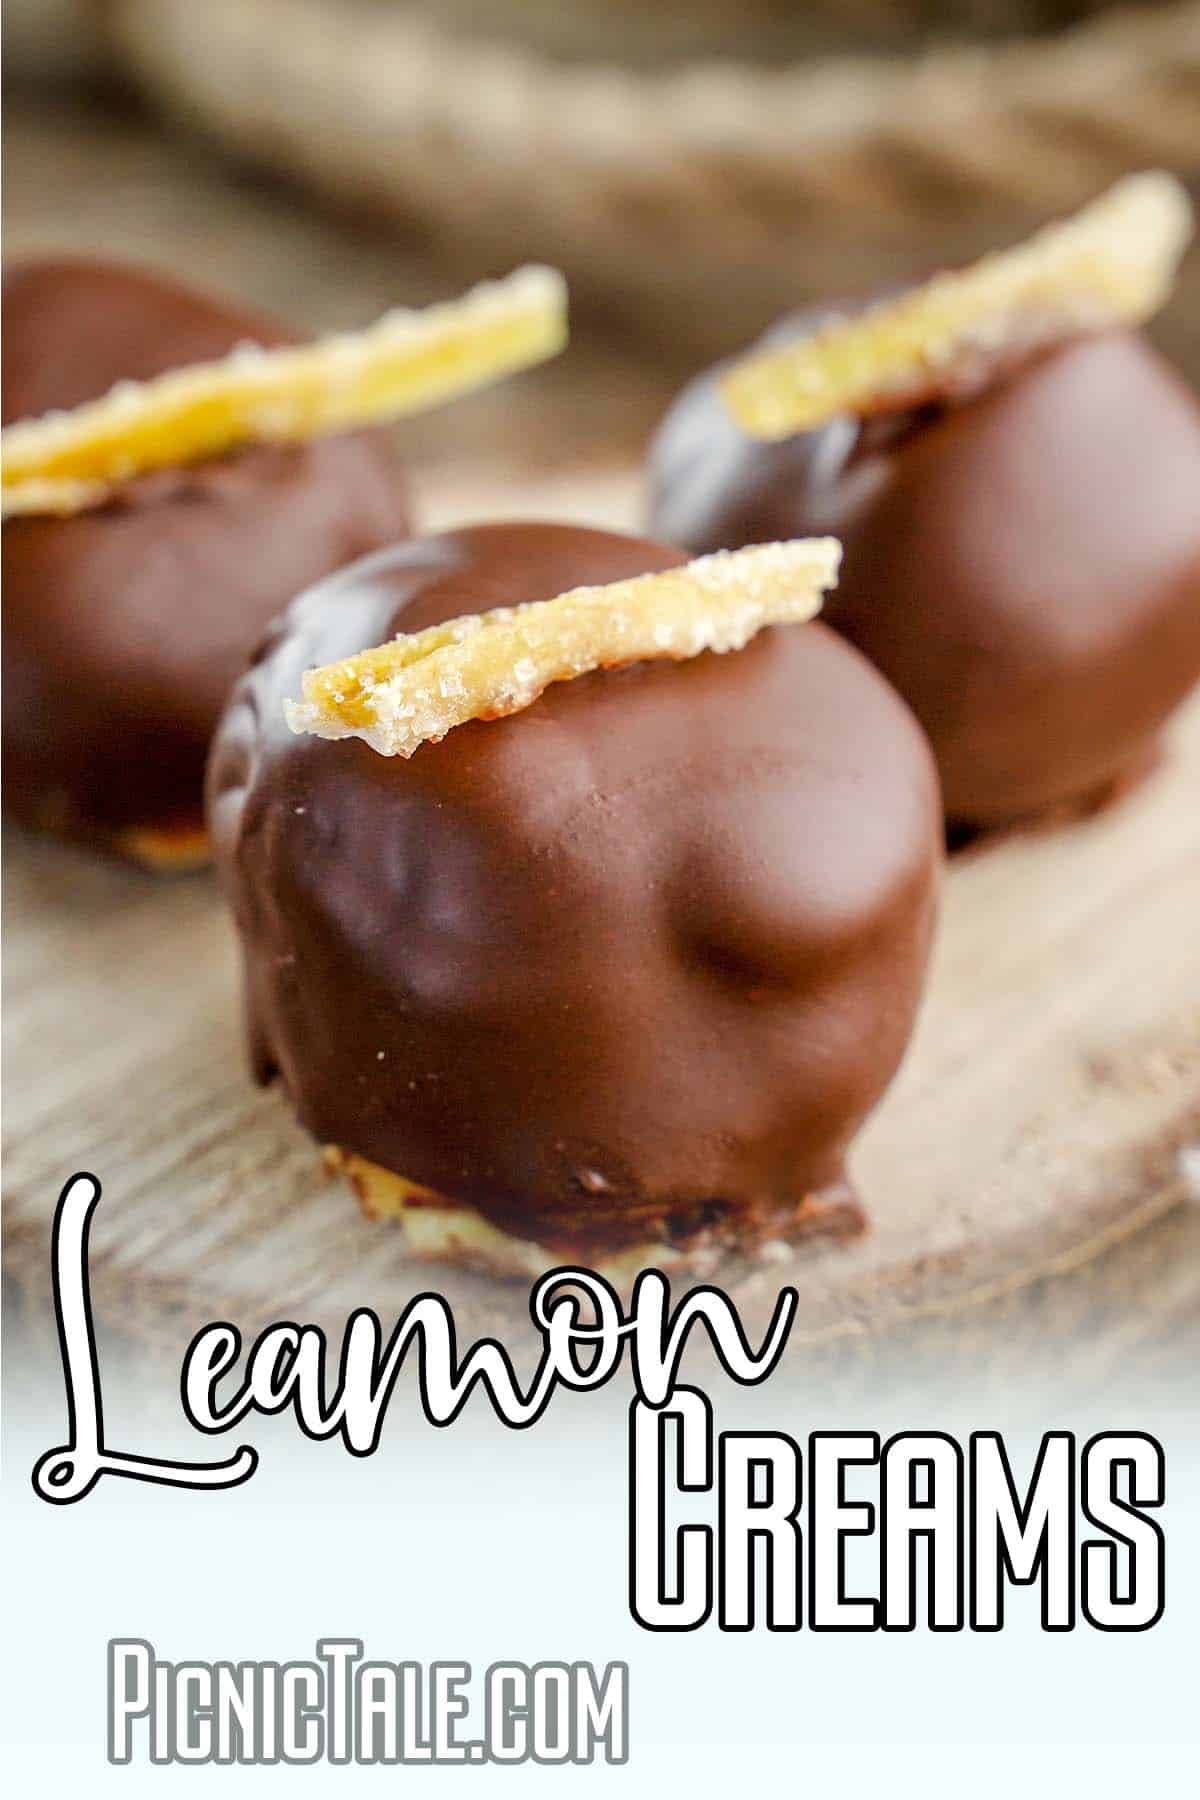 closeup of chocolate covered lemon cookies with text which reads Lemon Creams